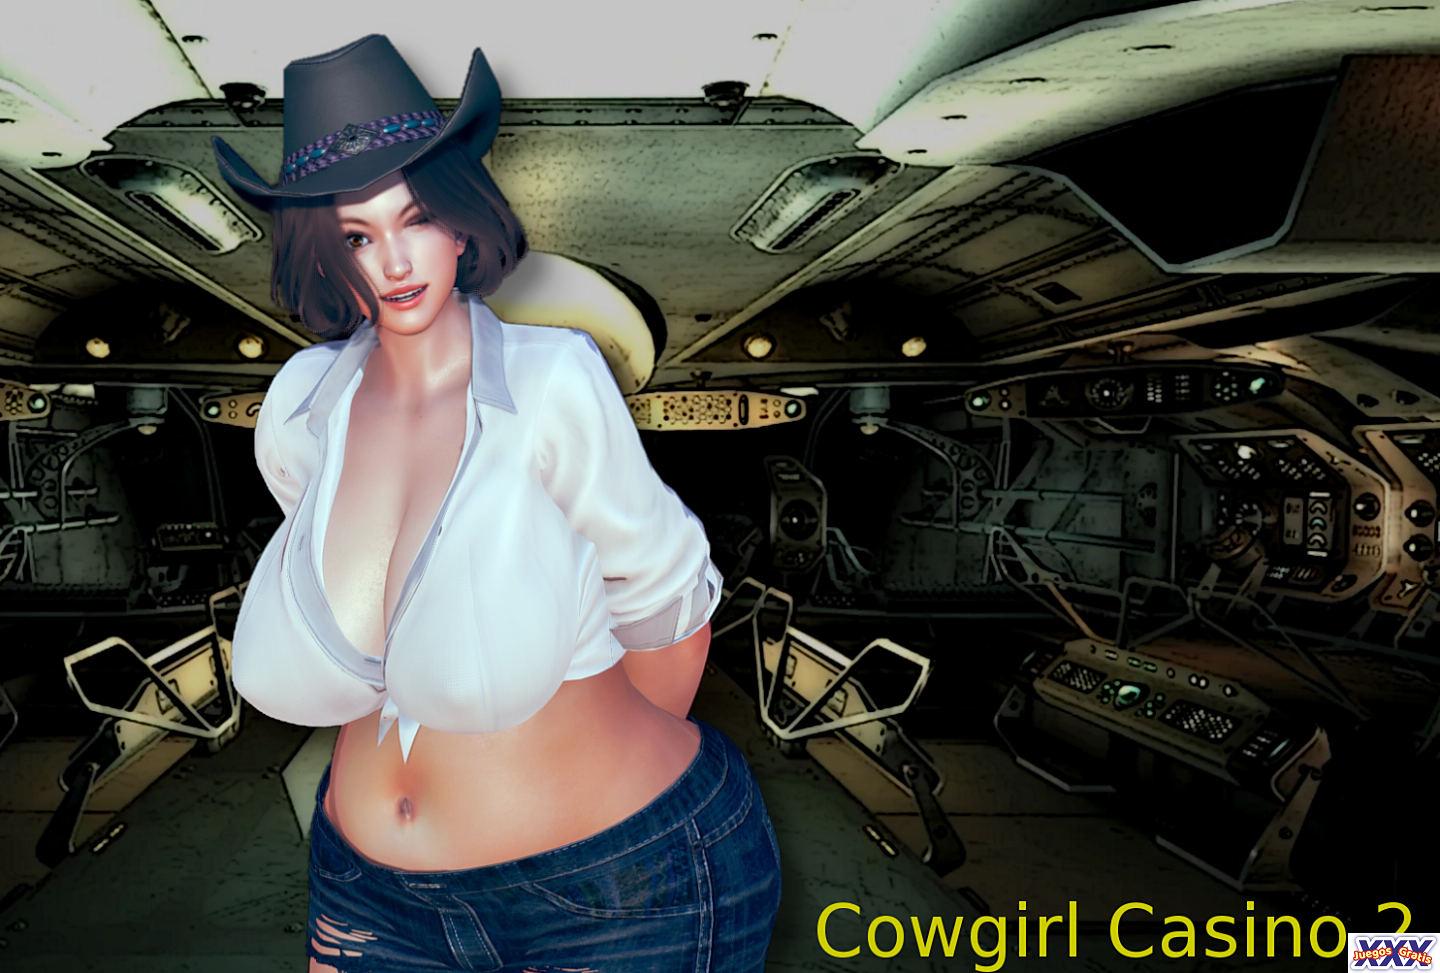 COWGIRL CASINO 2 [ANONYMOOSE PRODUCTIONS] [FINAL VERSION]